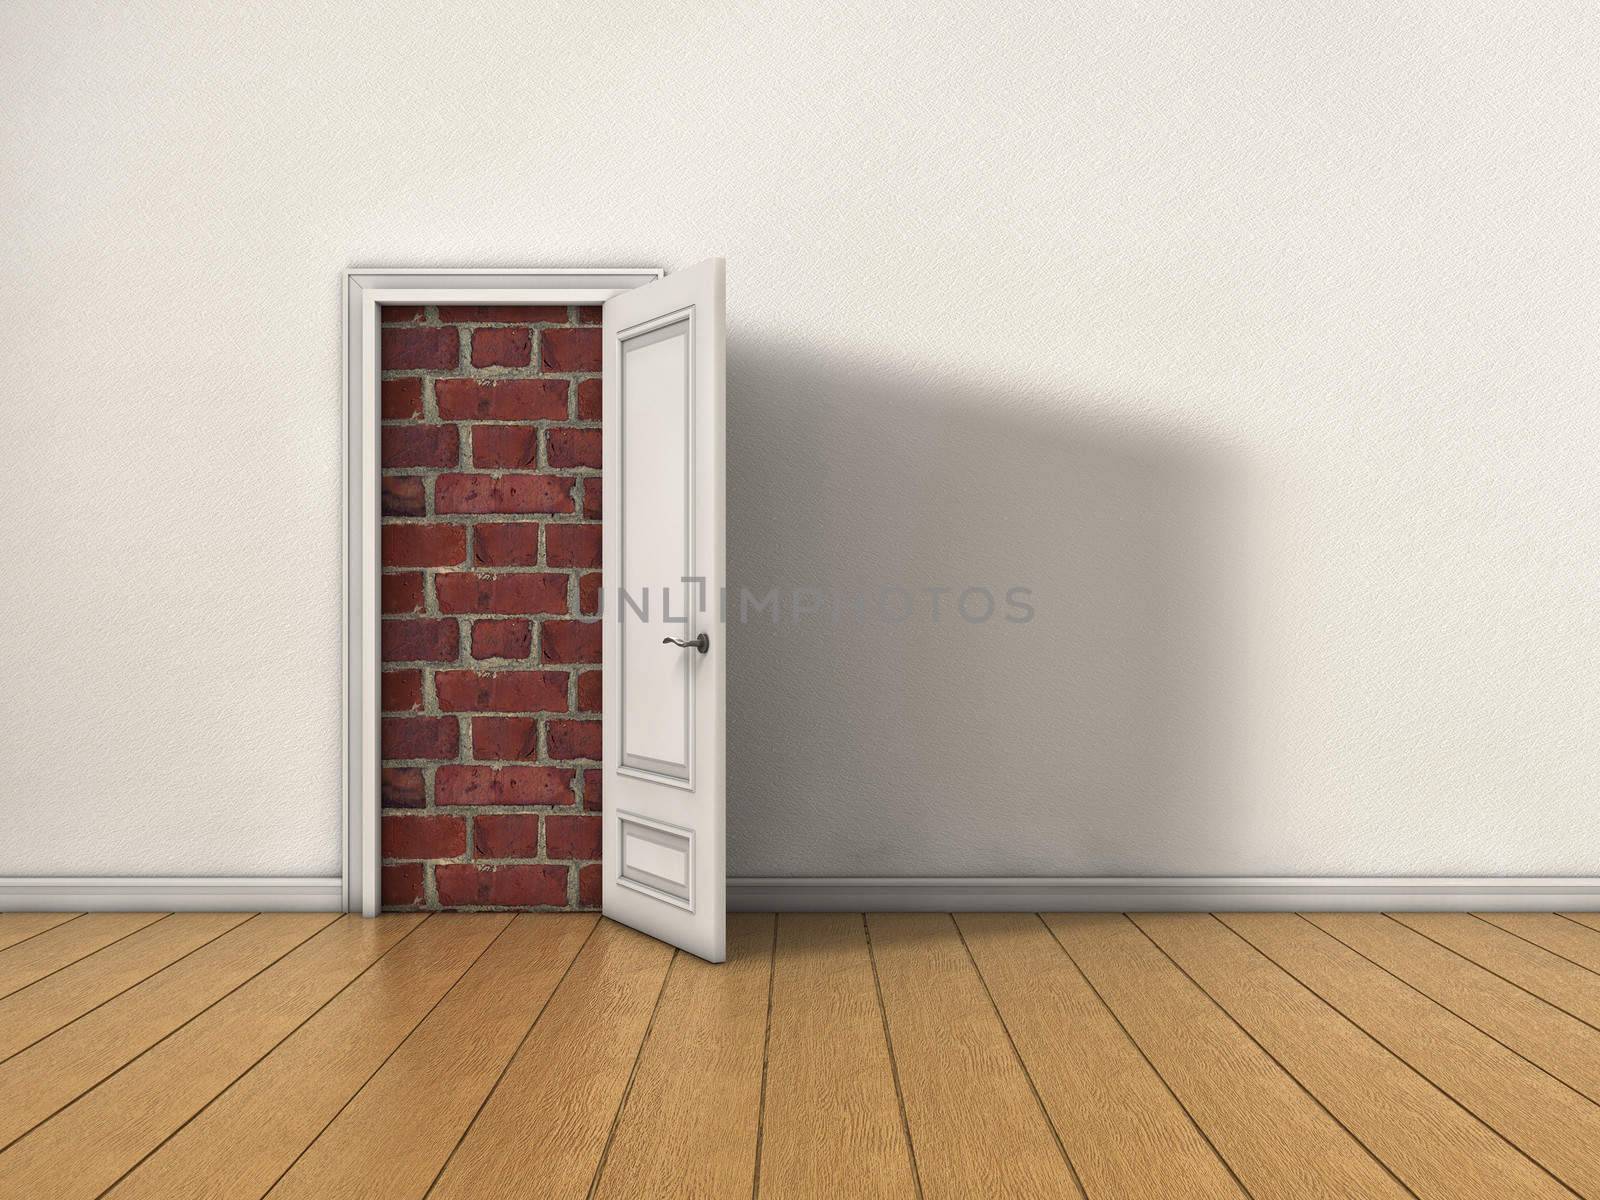 Room with opened door blocked by brick wall